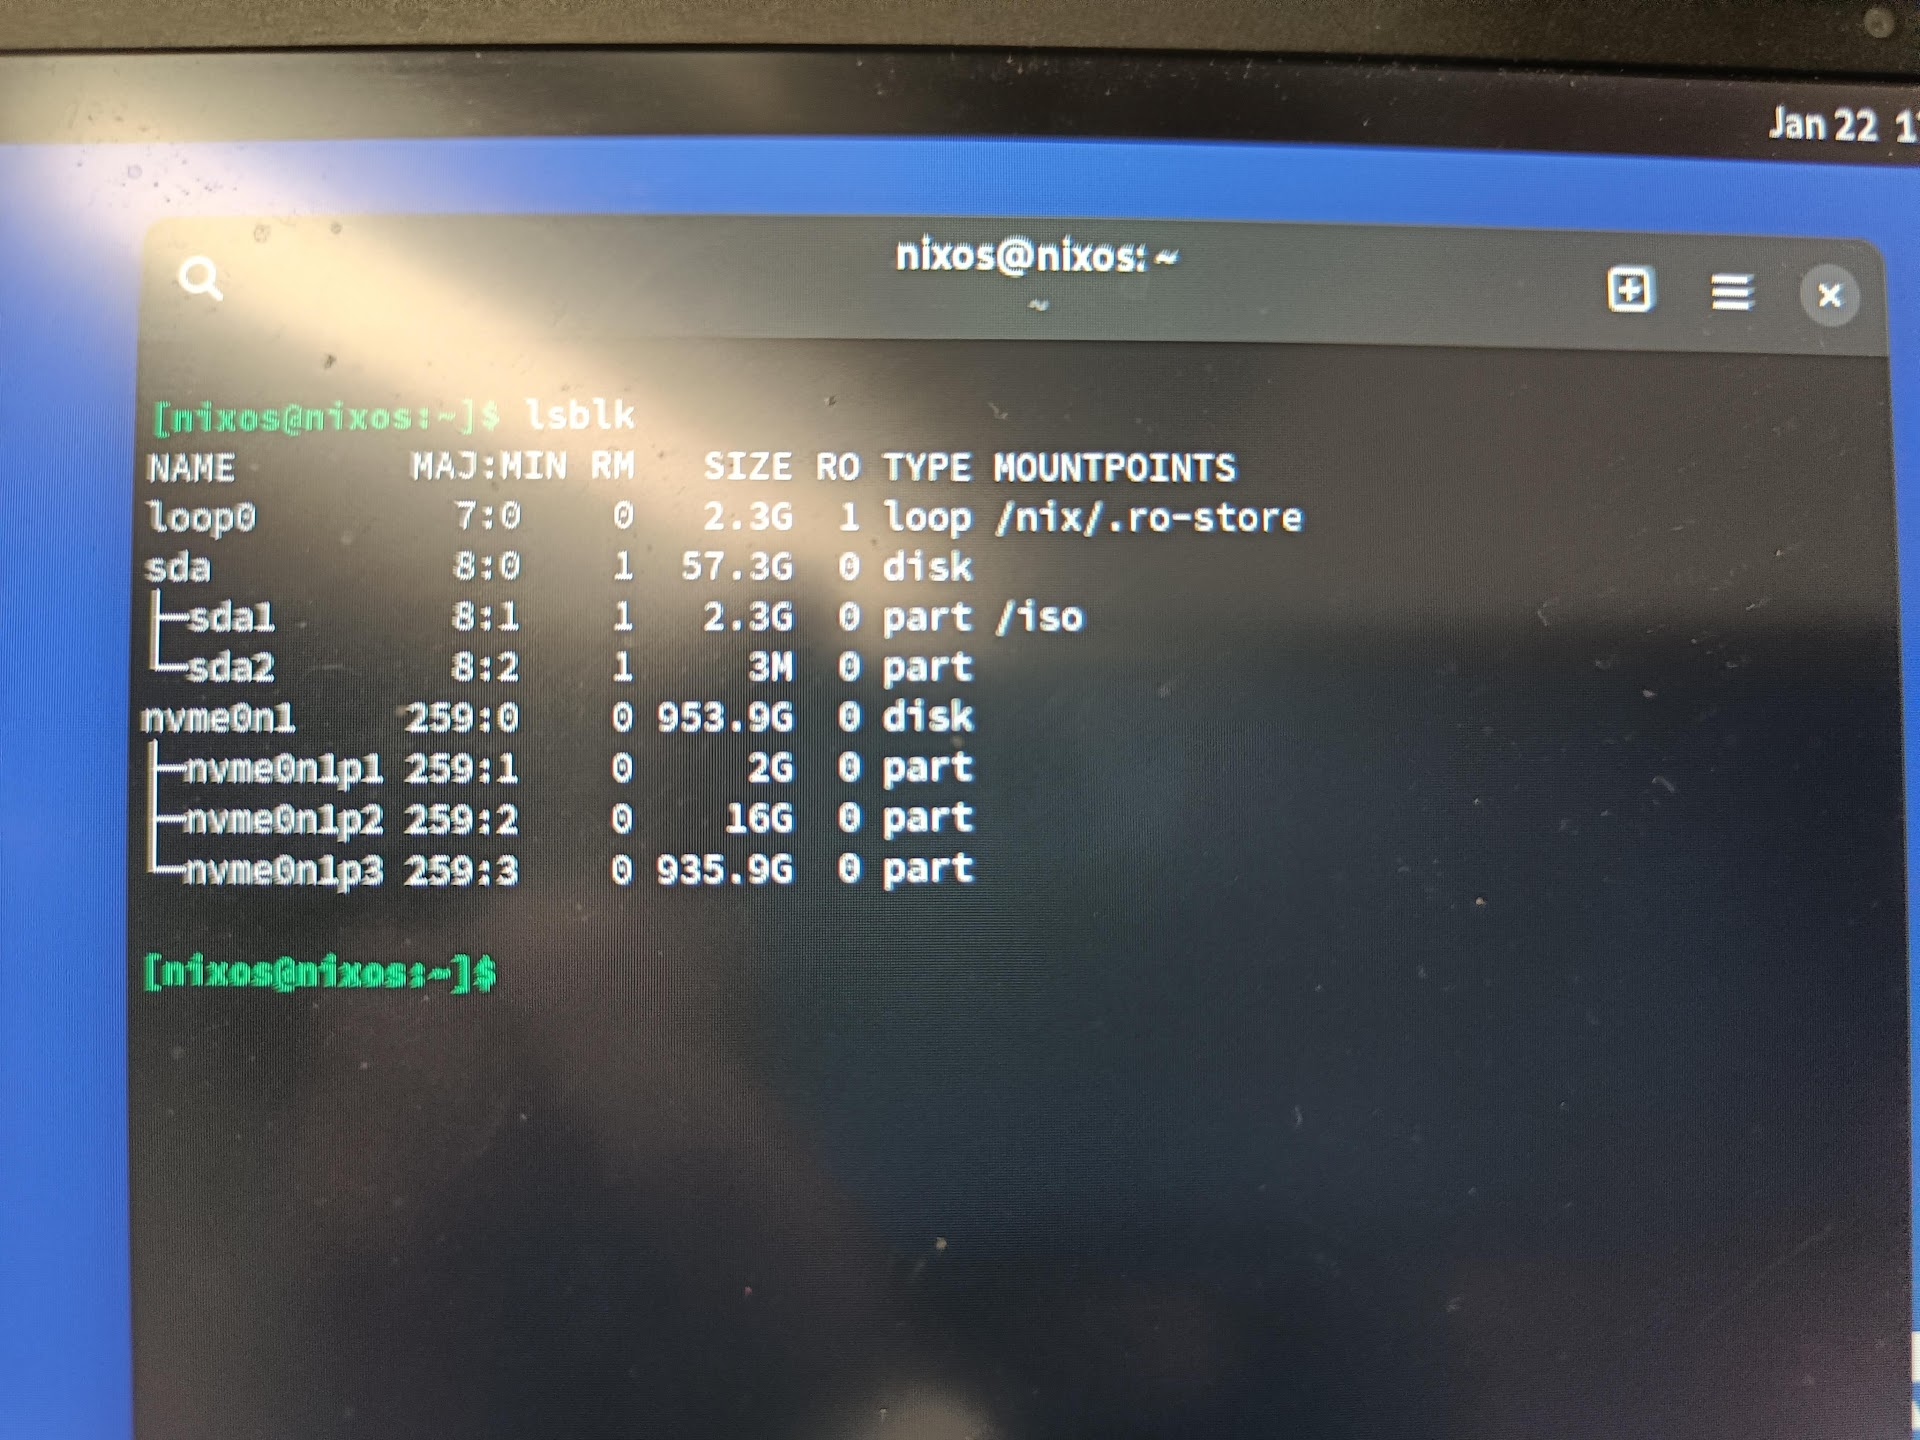 Live Linux: lsblk output From the Live Linux, you can now access and modify all your drives/partitions. In this case, /dev/nvme0n1p3 is the root partition of the installed Linux system.